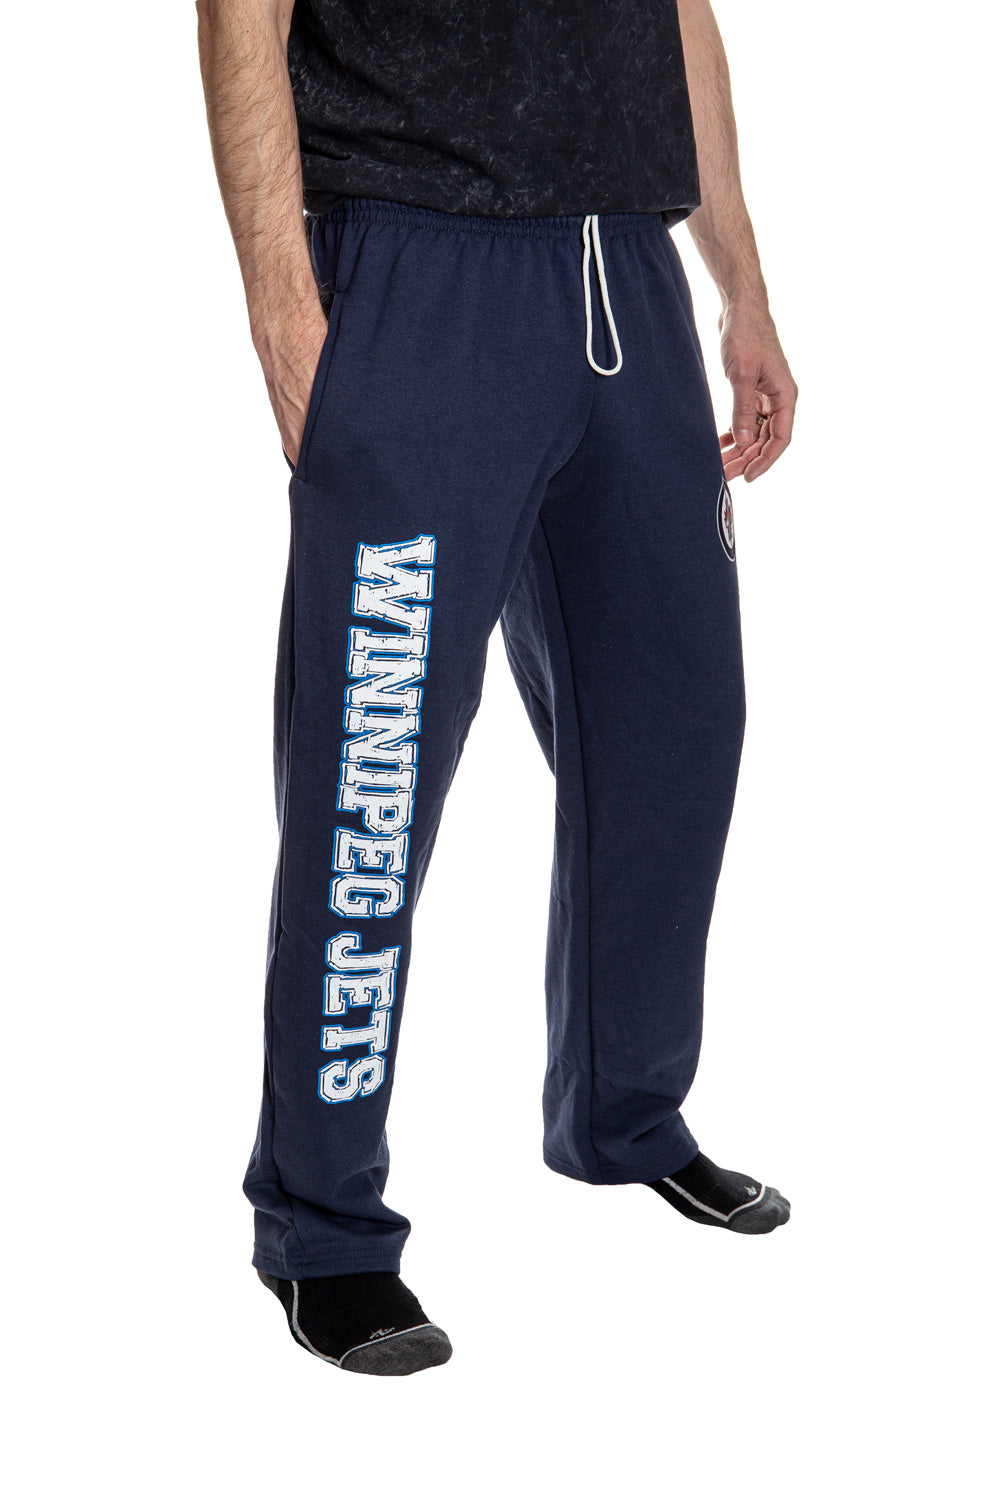 Winnipeg Jets French Terry Jogger Pants for Men